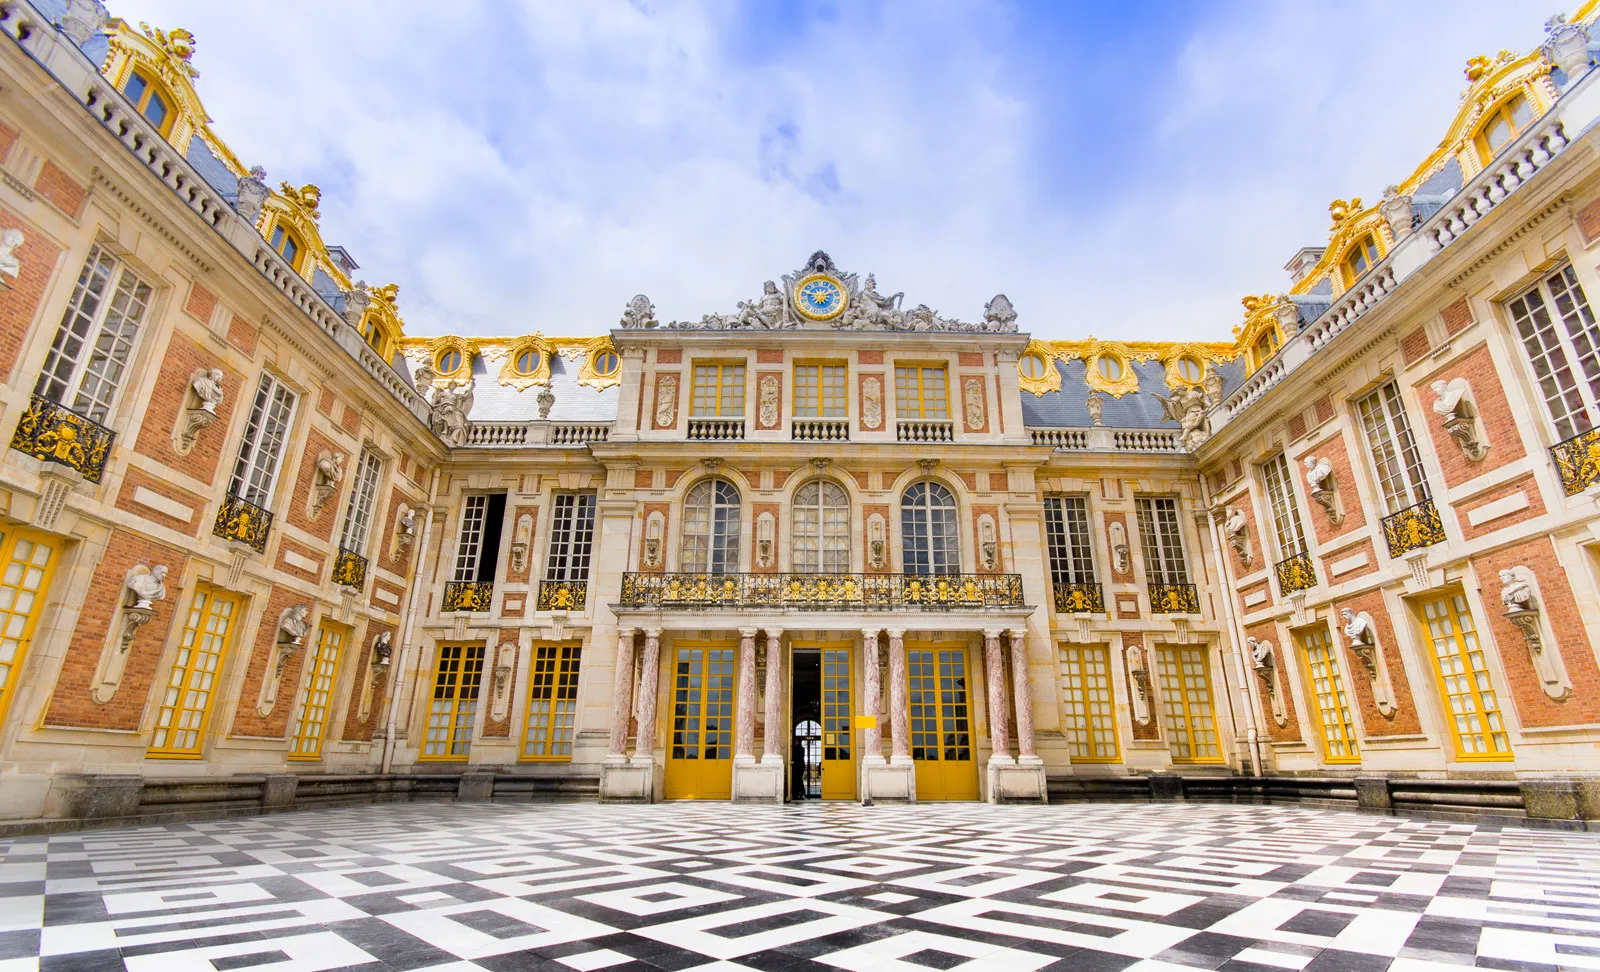 Palace of Versailles France